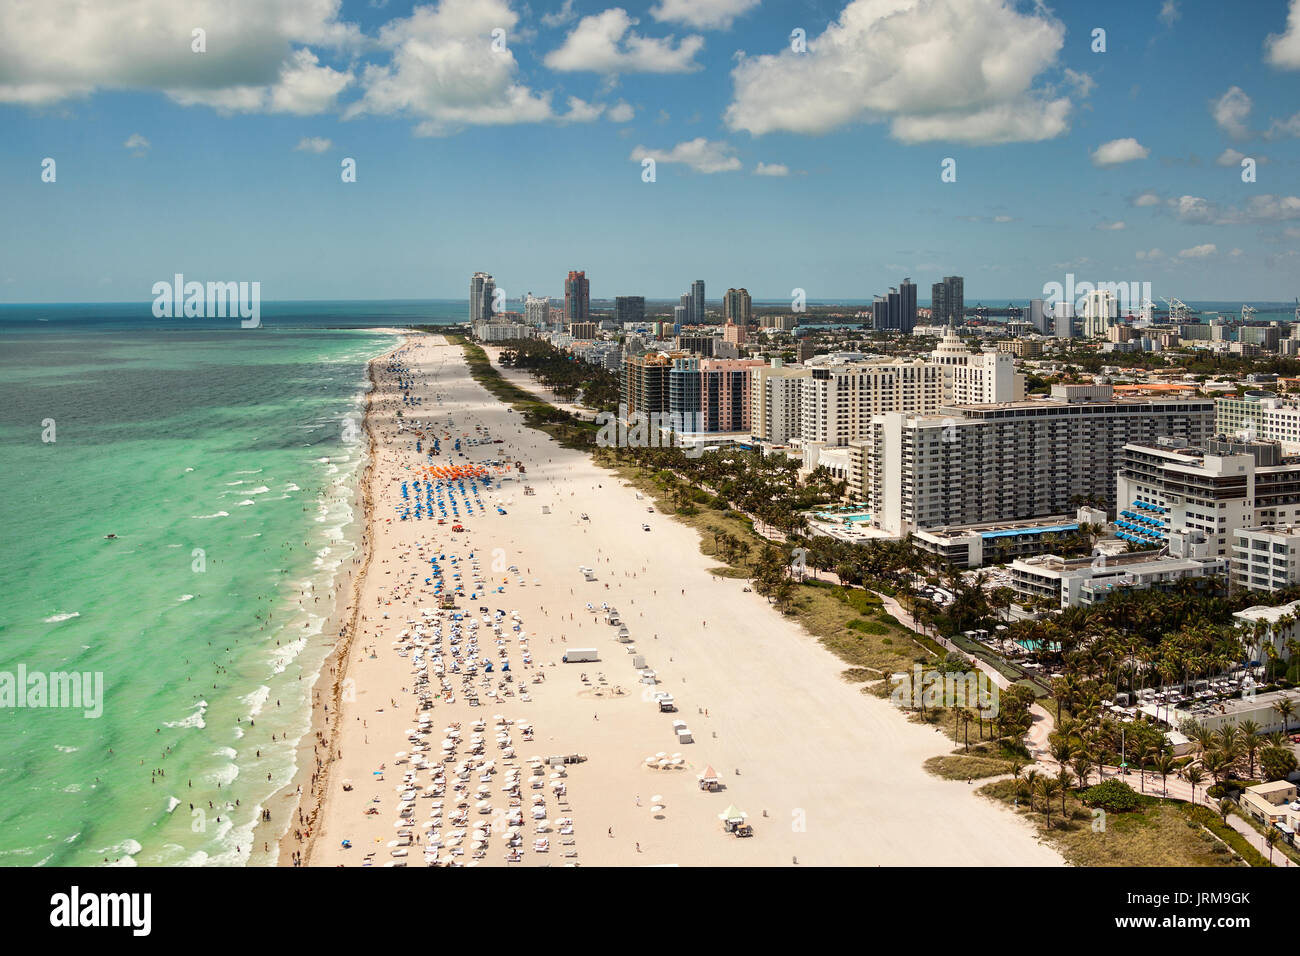 South Beach, Miami, Florida cityscape and beach, from the air Stock Photo